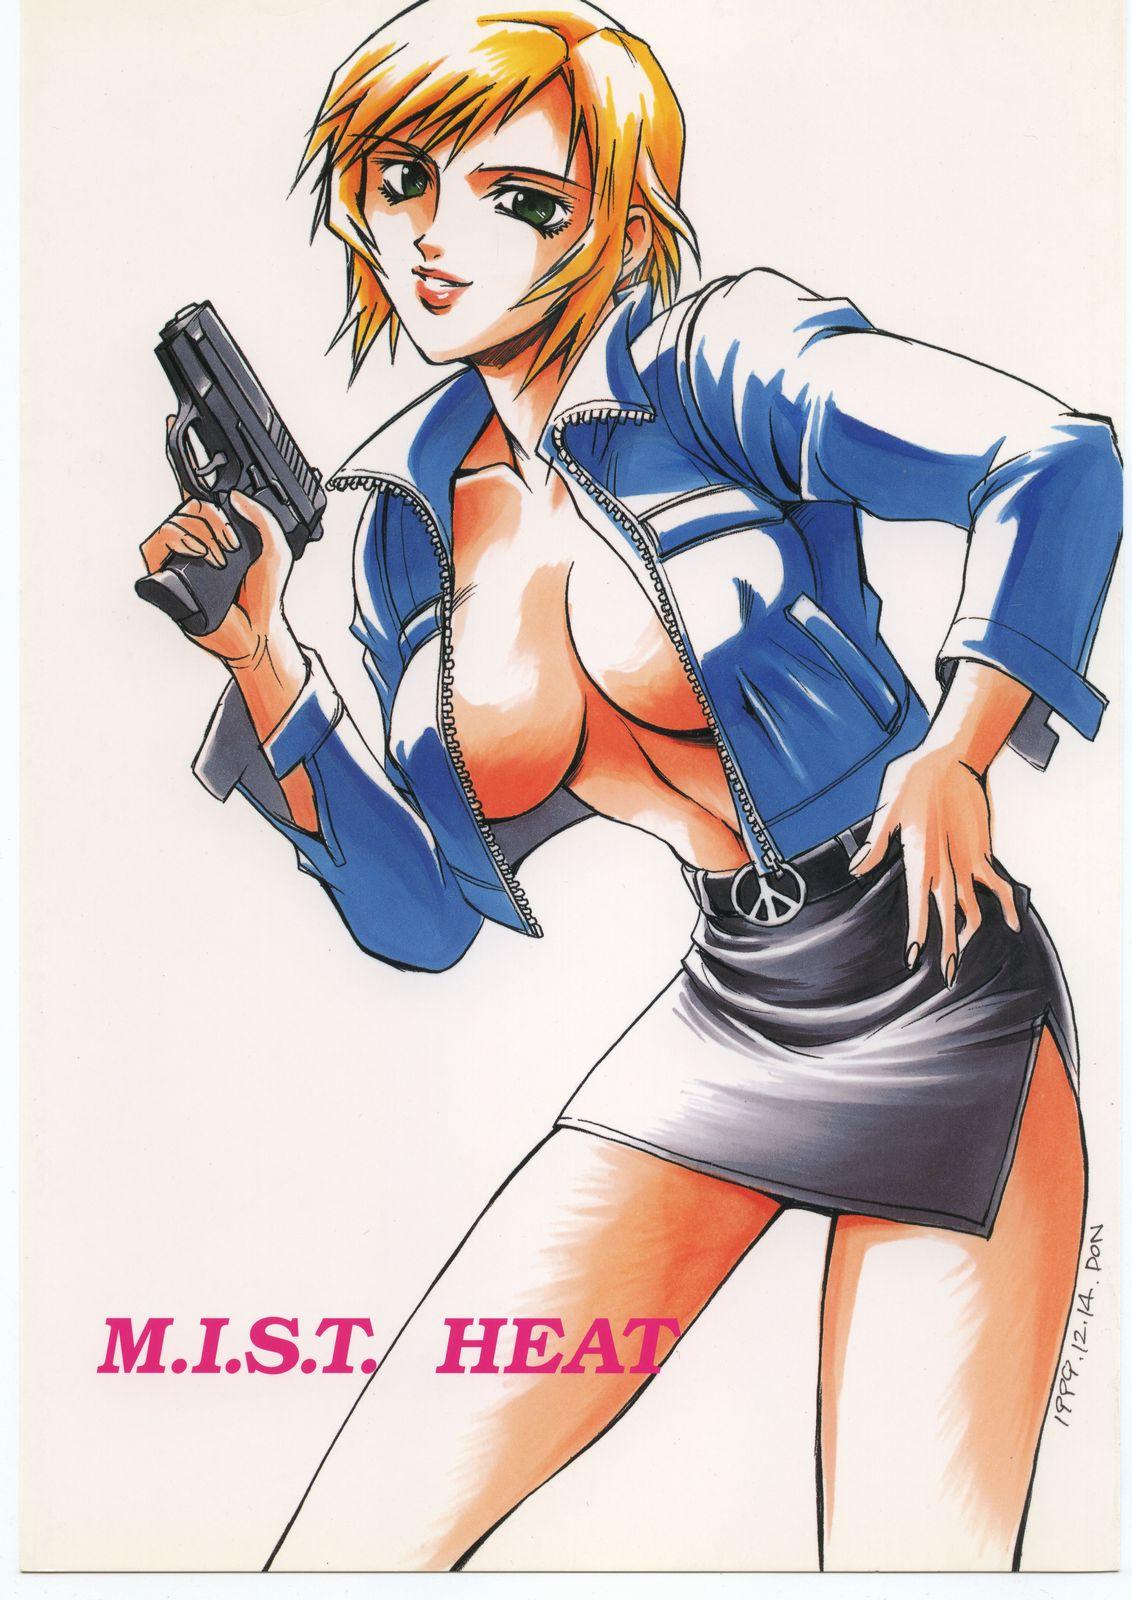 Twink M.I.S.T. HEAT - Parasite eve Piercing - Picture 1